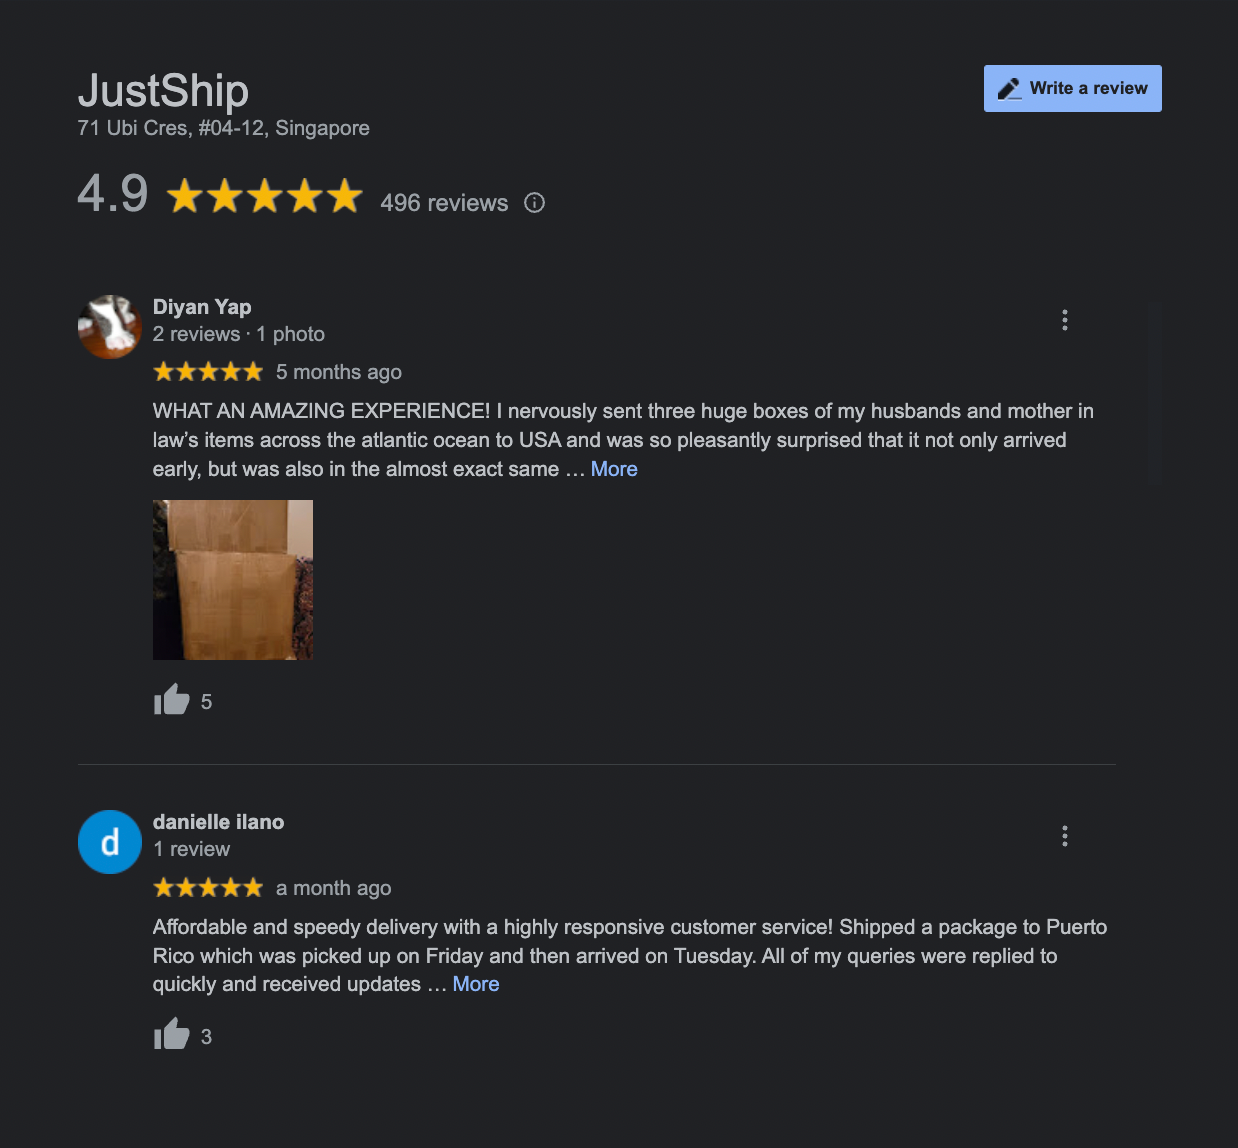 justship's google review